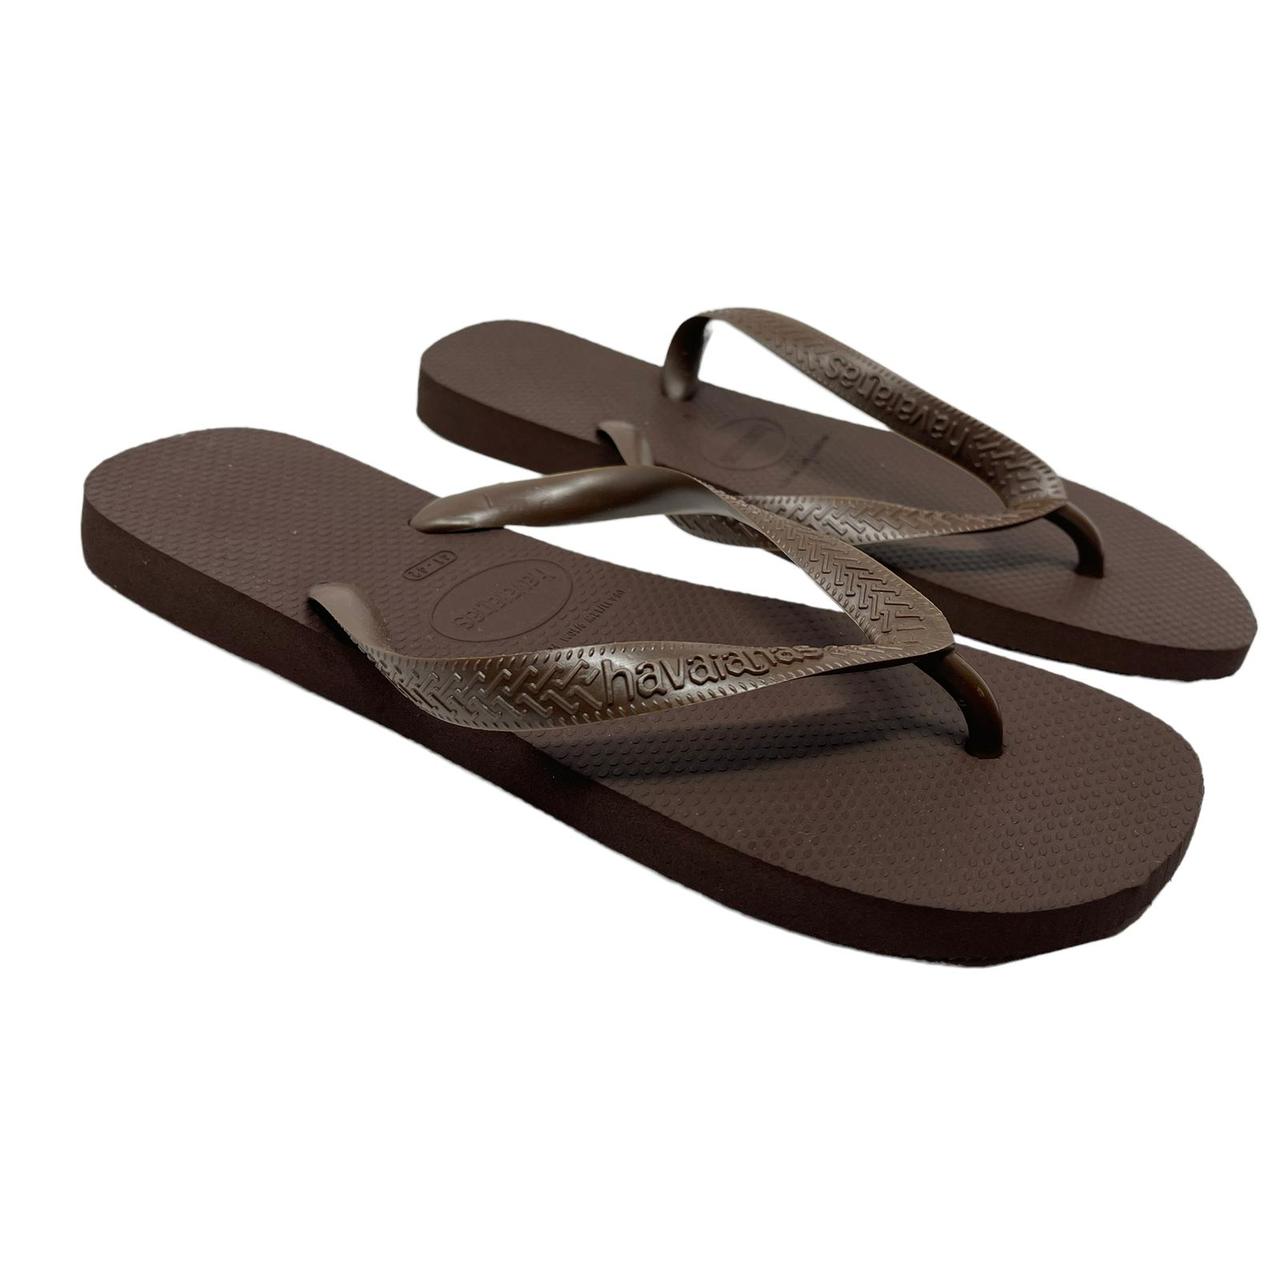 Product Image 2 - Havaianas Brown Flip Flops

Great condition
Size